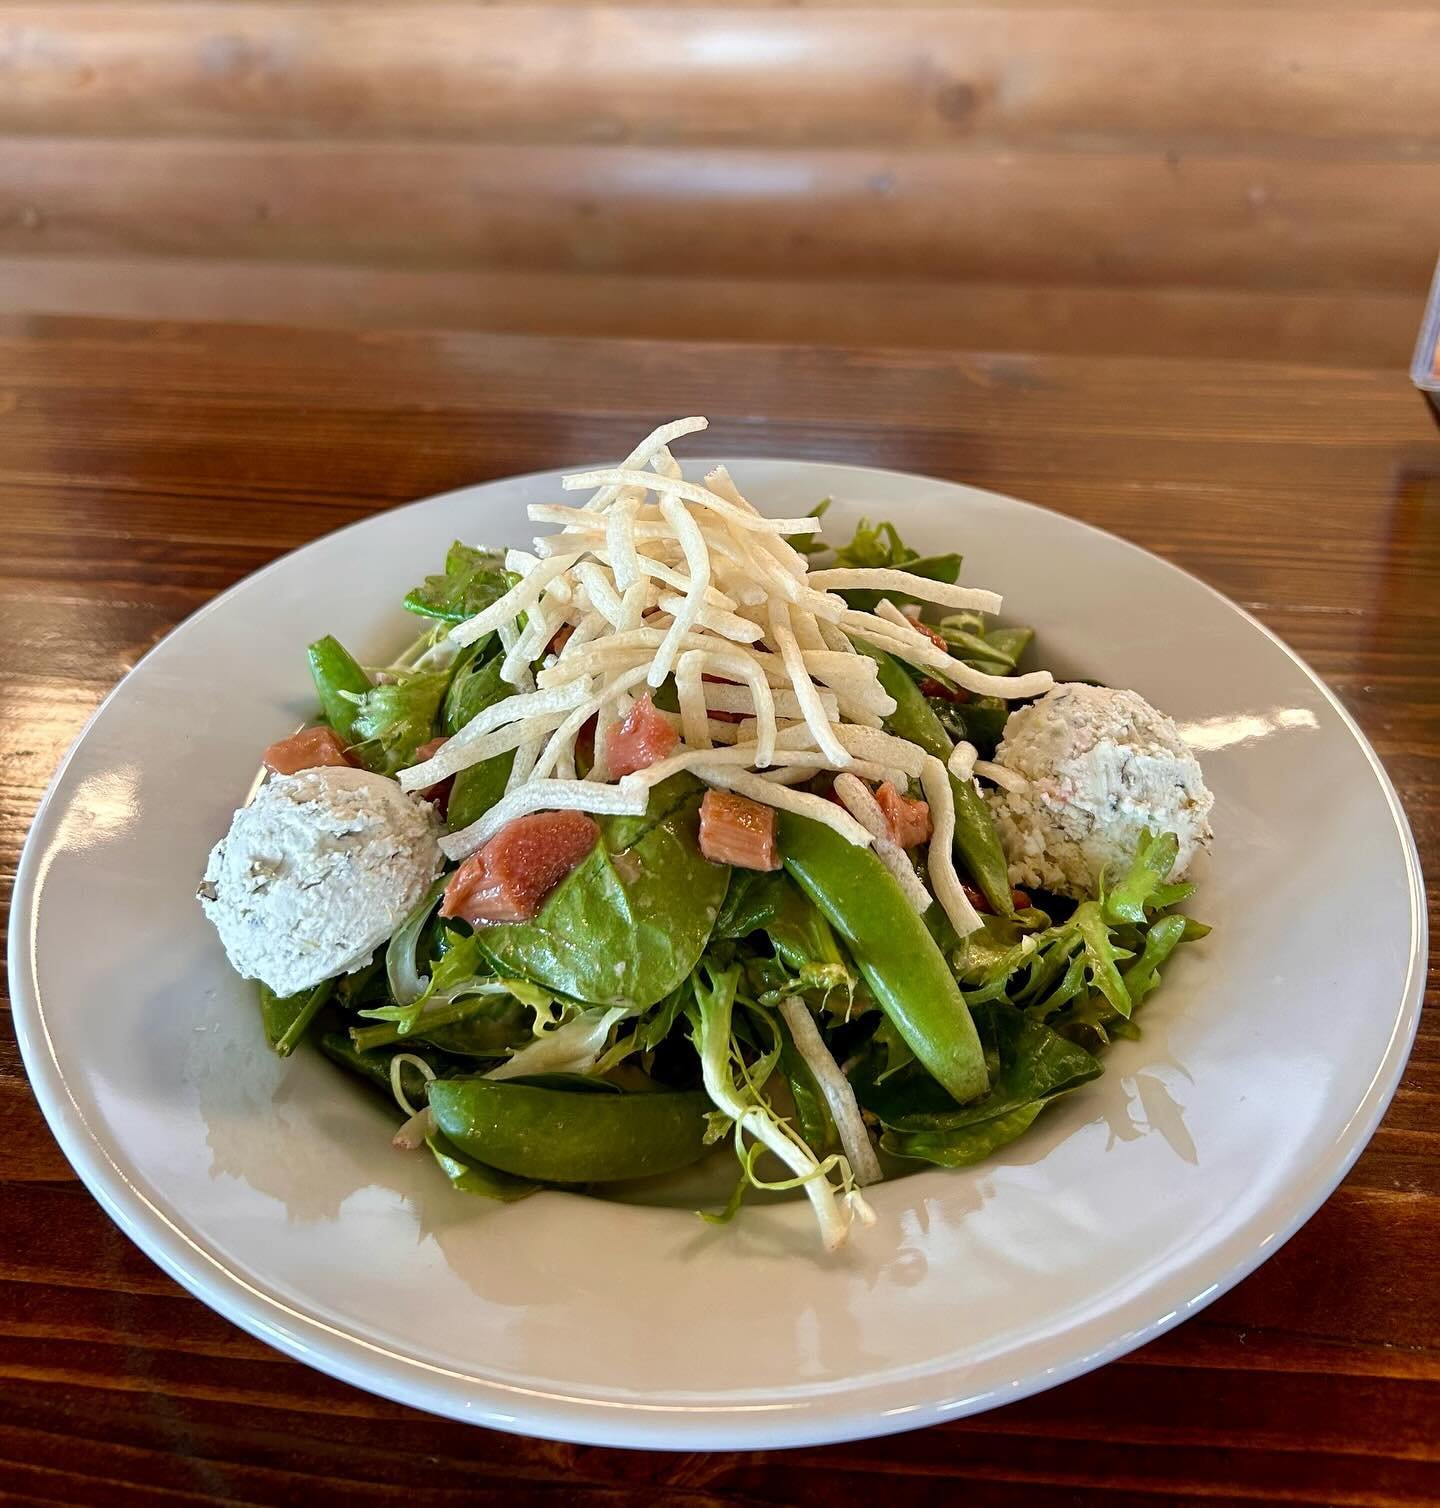 Littleton/Santa Fe - Susitna Seasonal Salad! Spinach &amp; fris&eacute;e tossed in strawberry-white balsamic vinaigrette with roasted rhubarb, charred onion goat cheese, sugar snap peas, &amp; puffed rice noodles! 
Only available at our Littleton loc